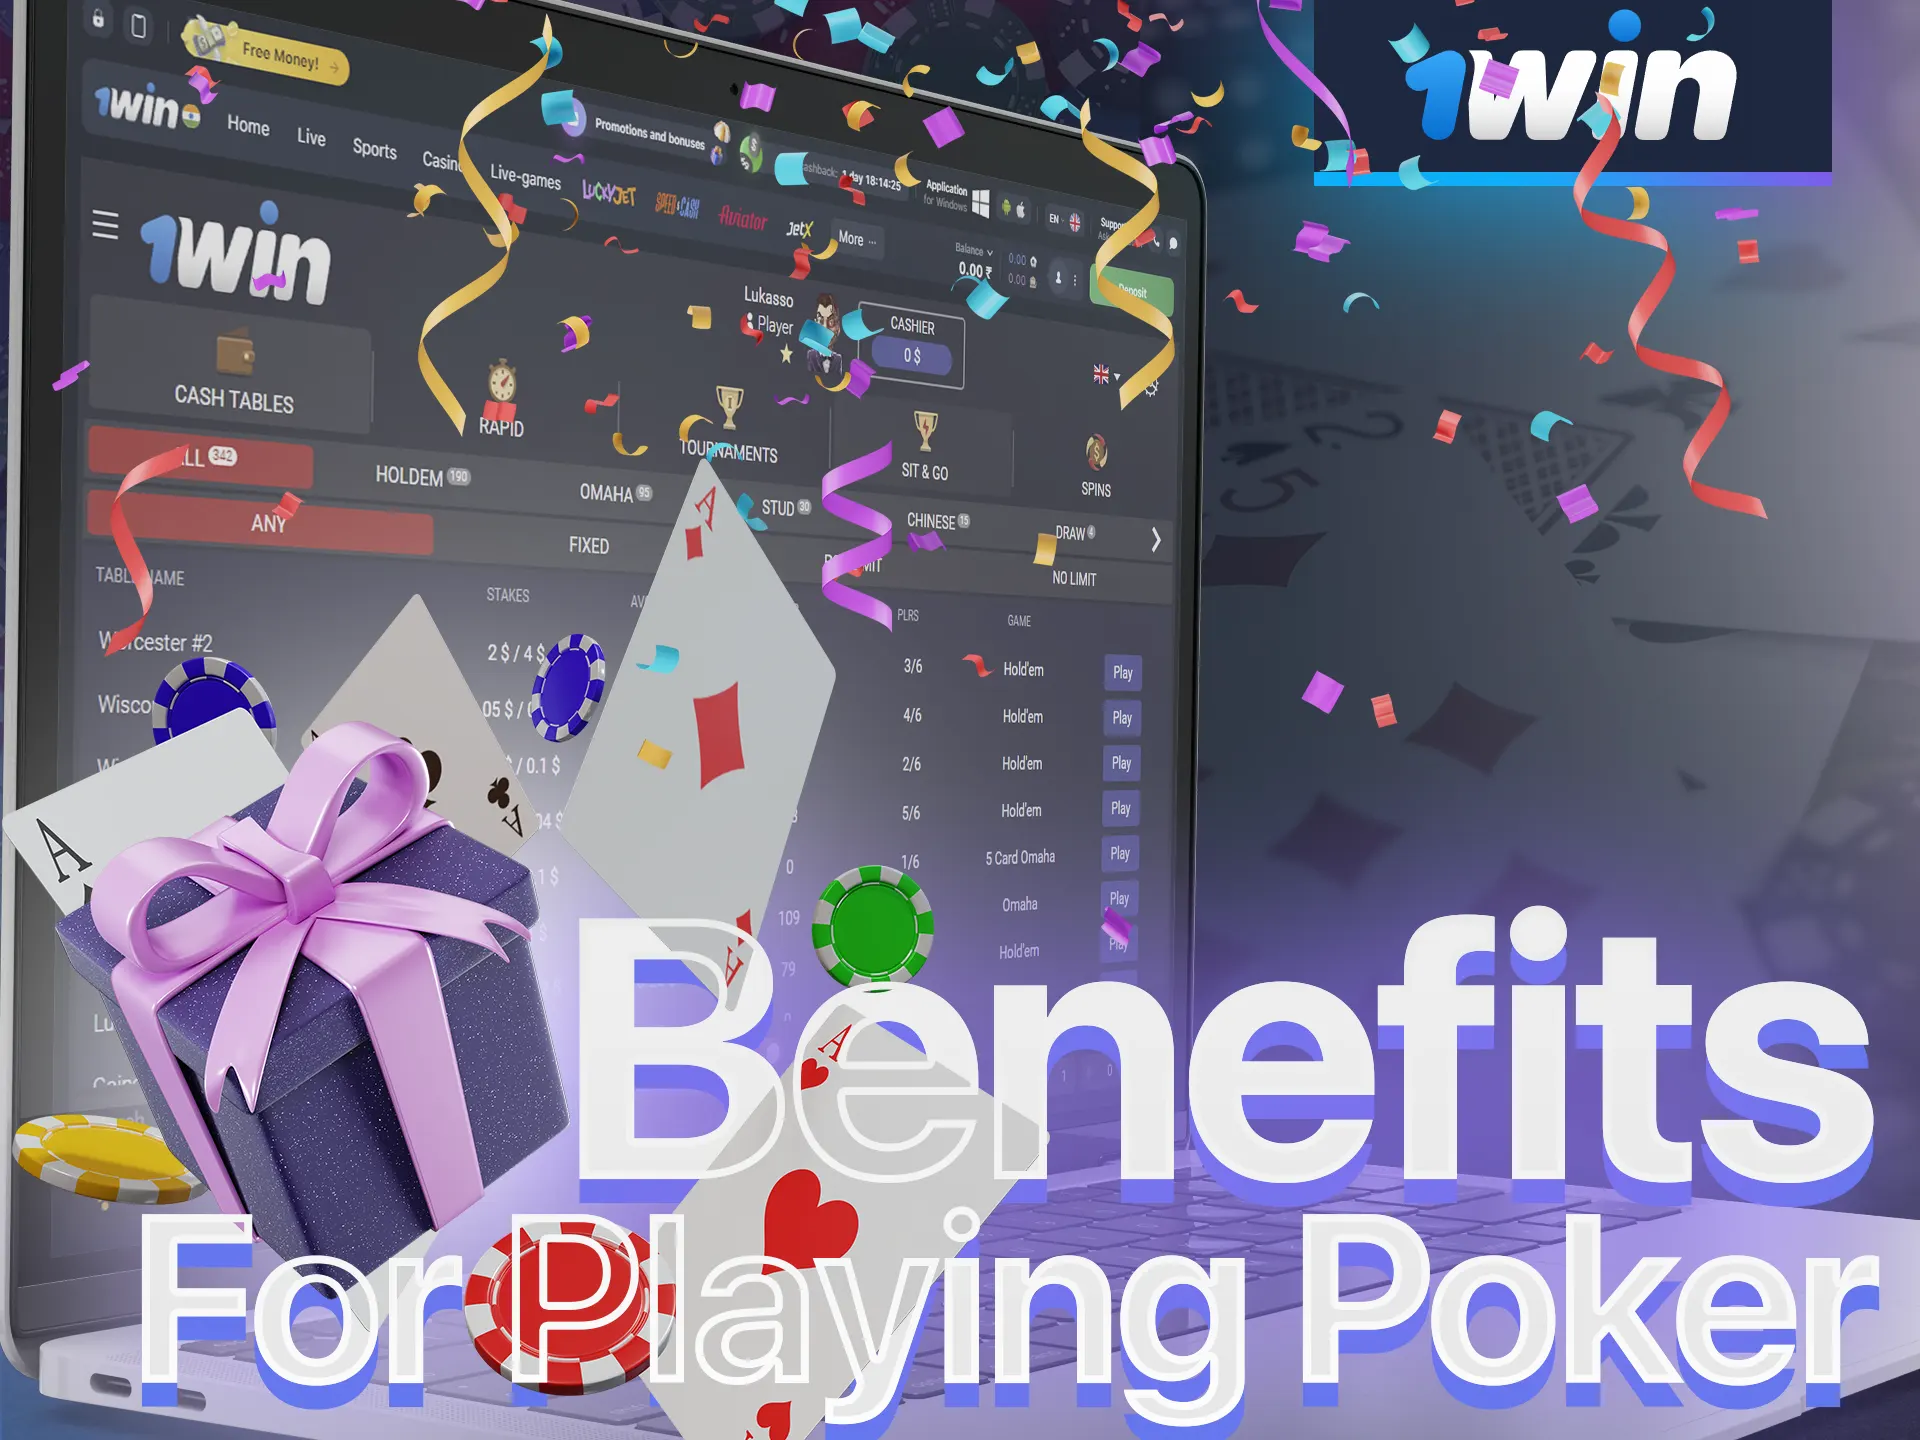 1Win has a variety of benefits for poker players.